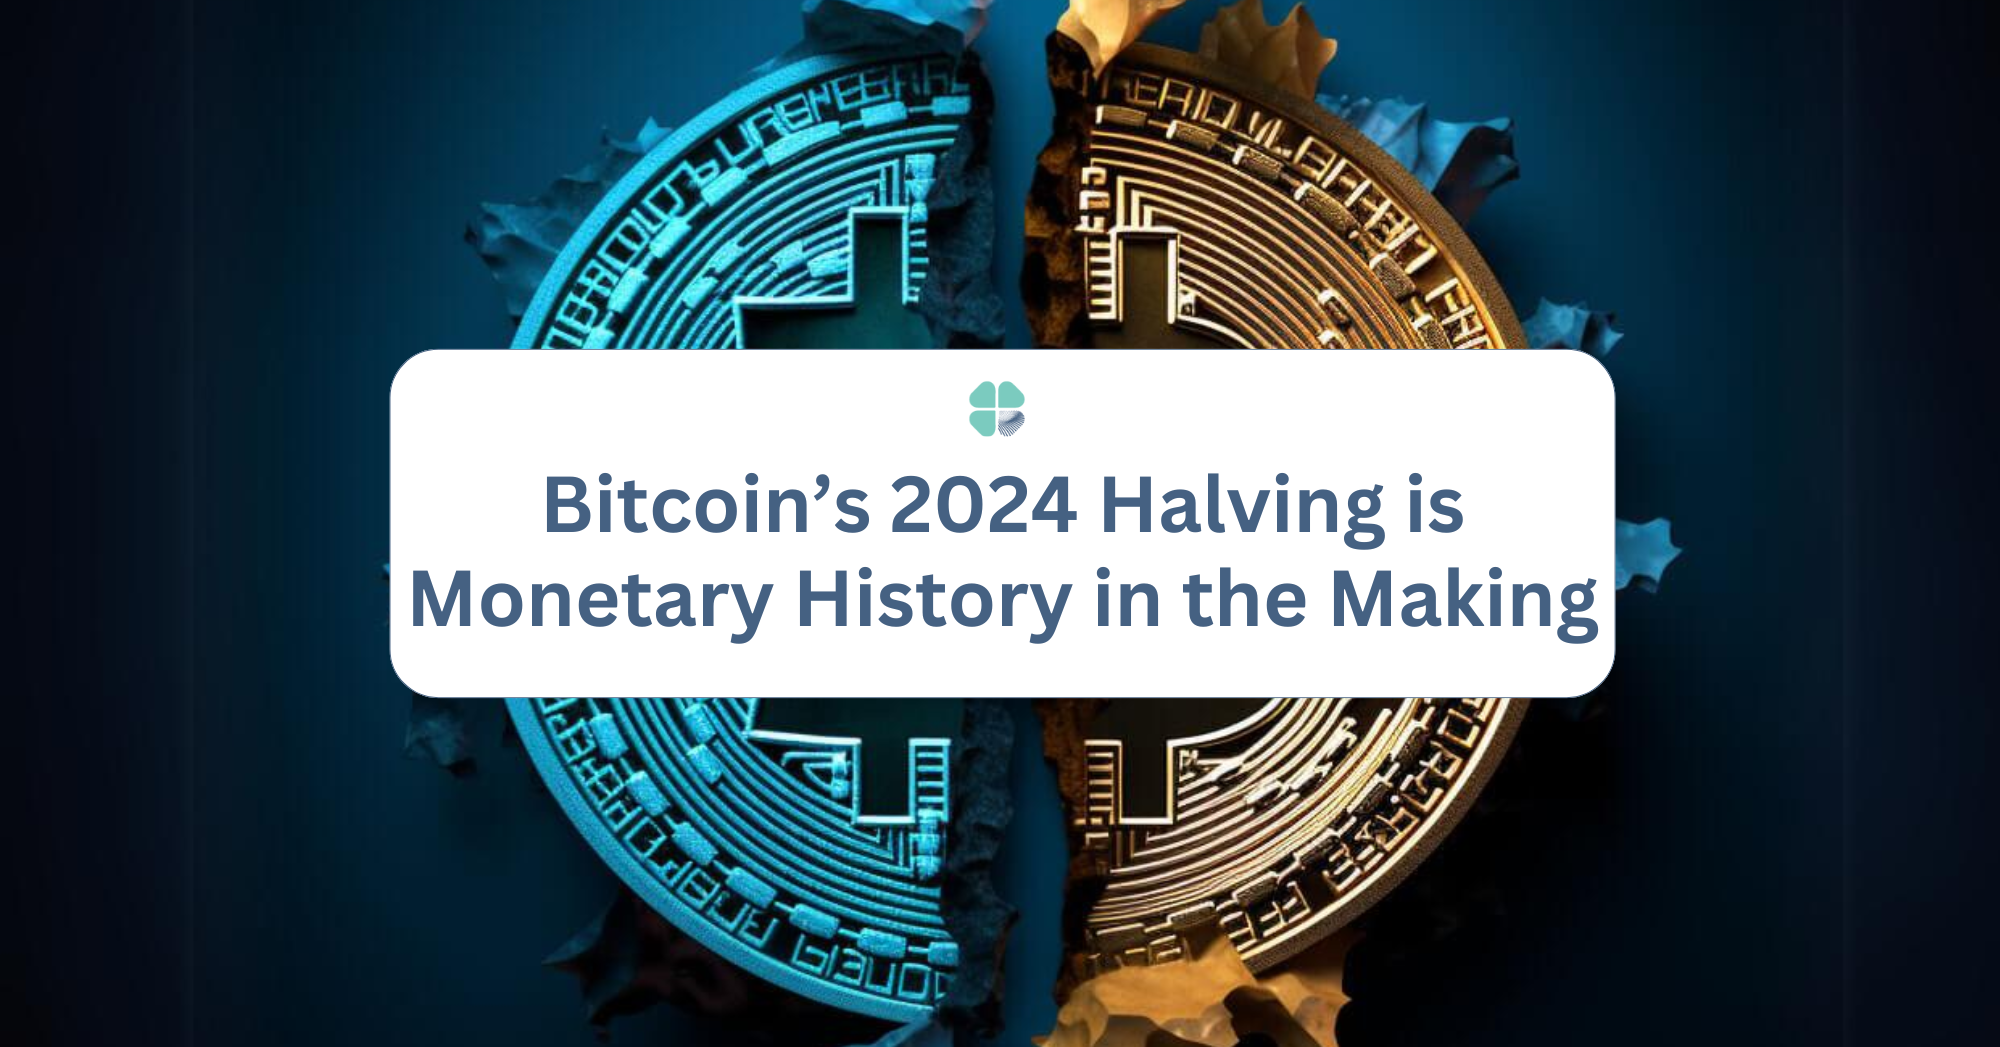 Bitcoin Halving 2024 represented by a coin cut in half